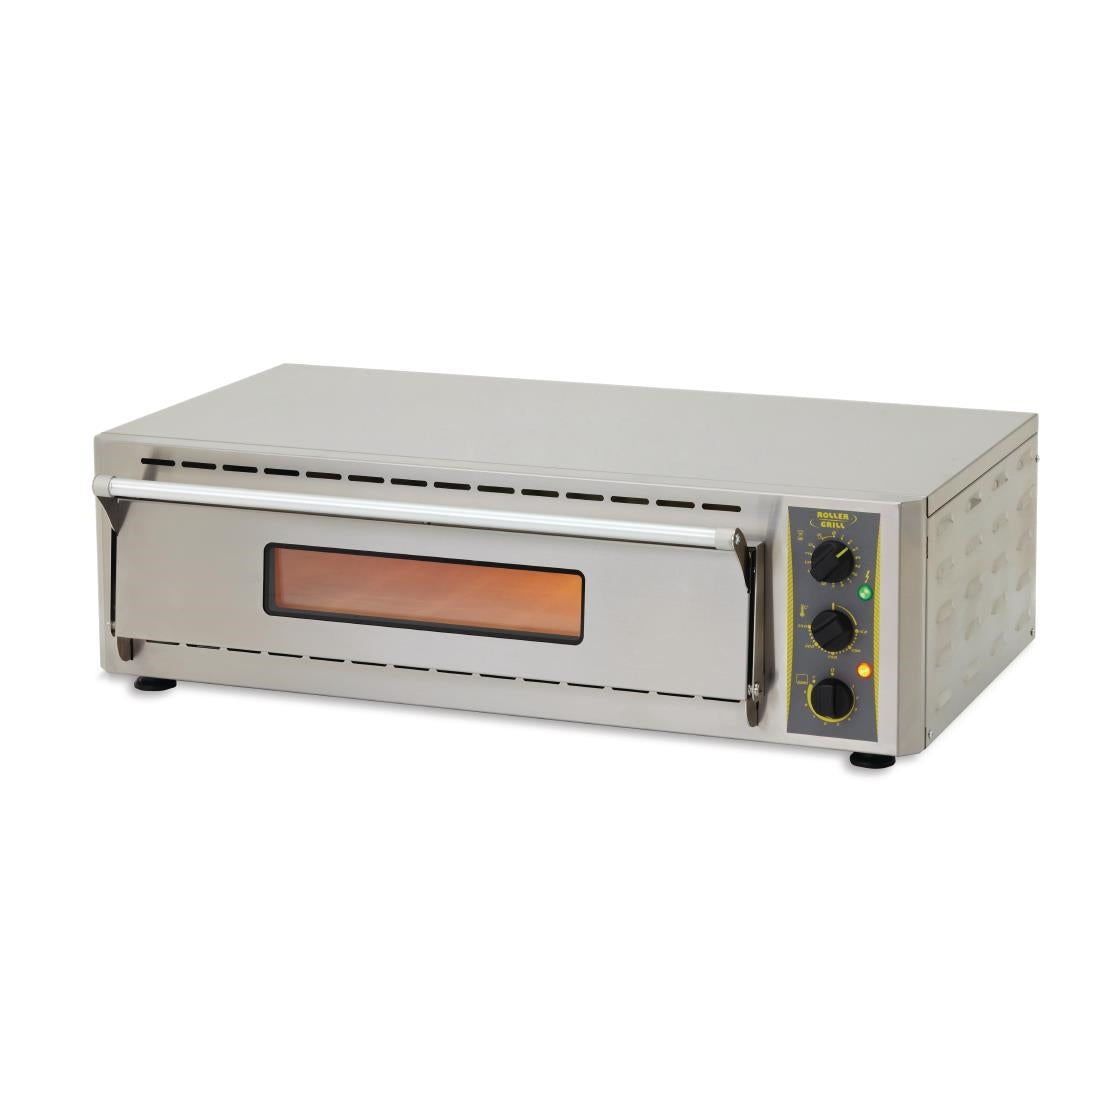 DA185 Roller Grill Double Width Pizza Oven PZ4302 D JD Catering Equipment Solutions Ltd